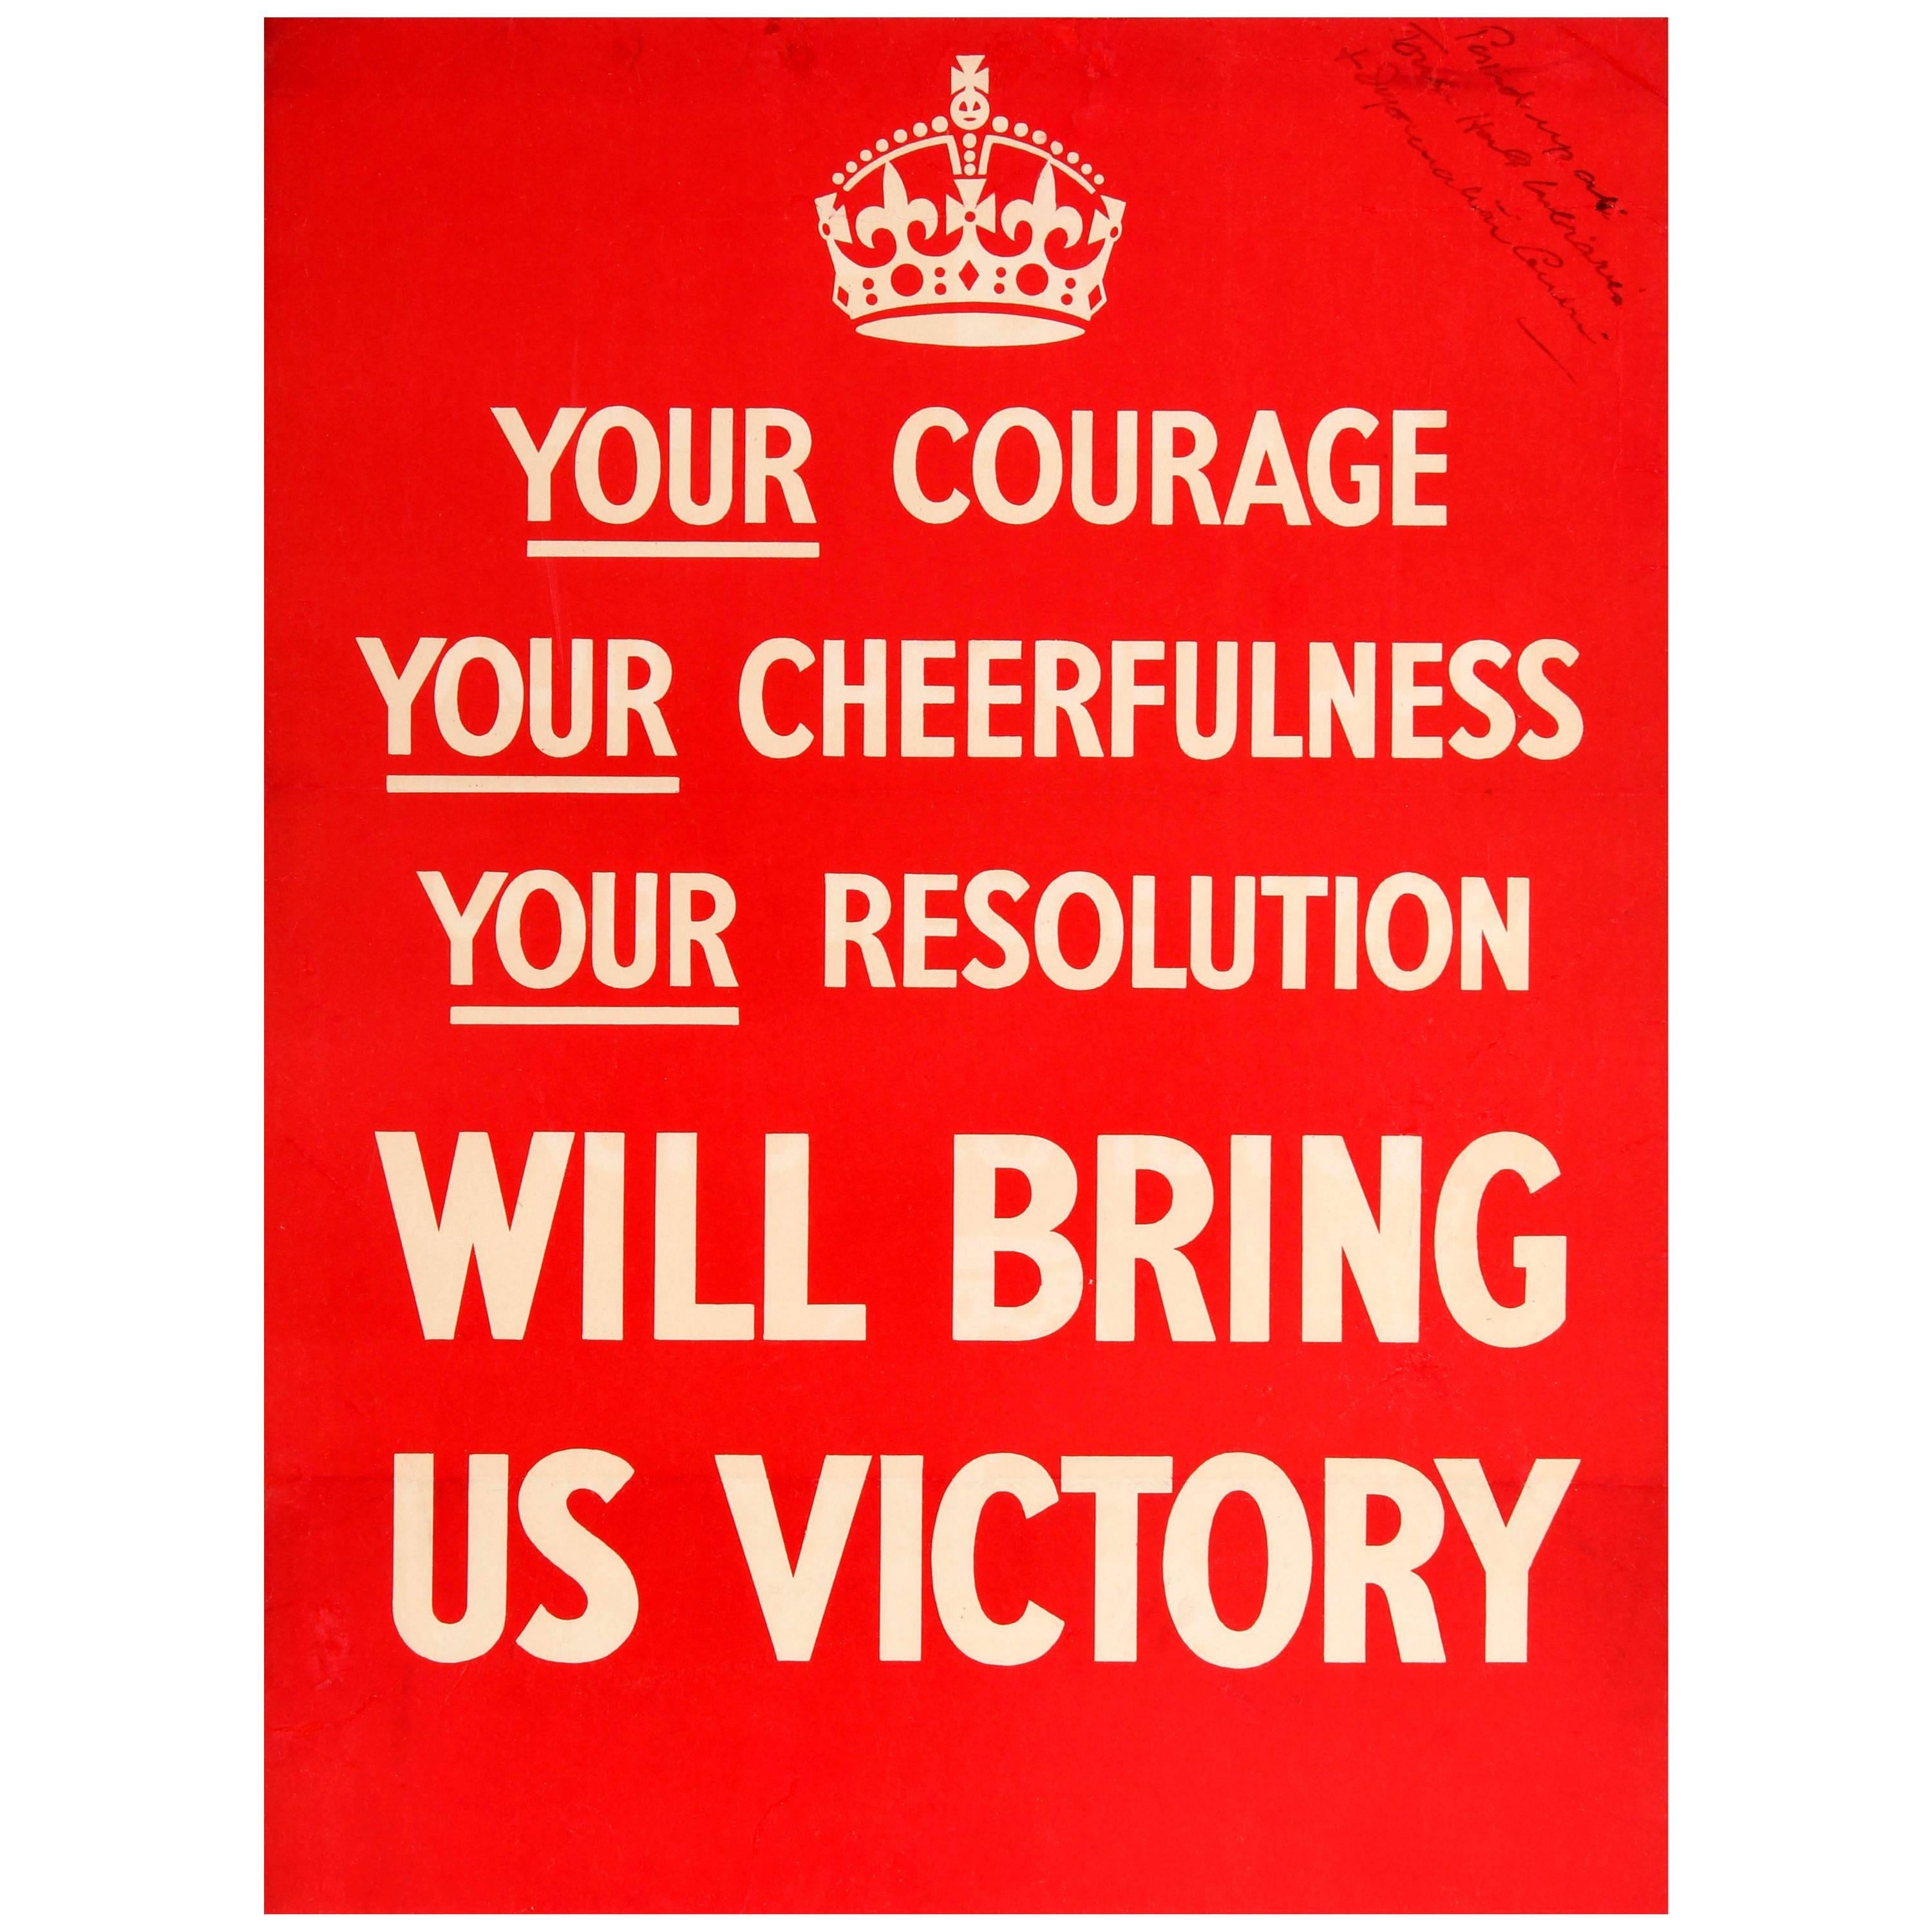 Original Iconic 1939 World War Two Poster - Your Courage Cheerfulness Resolution